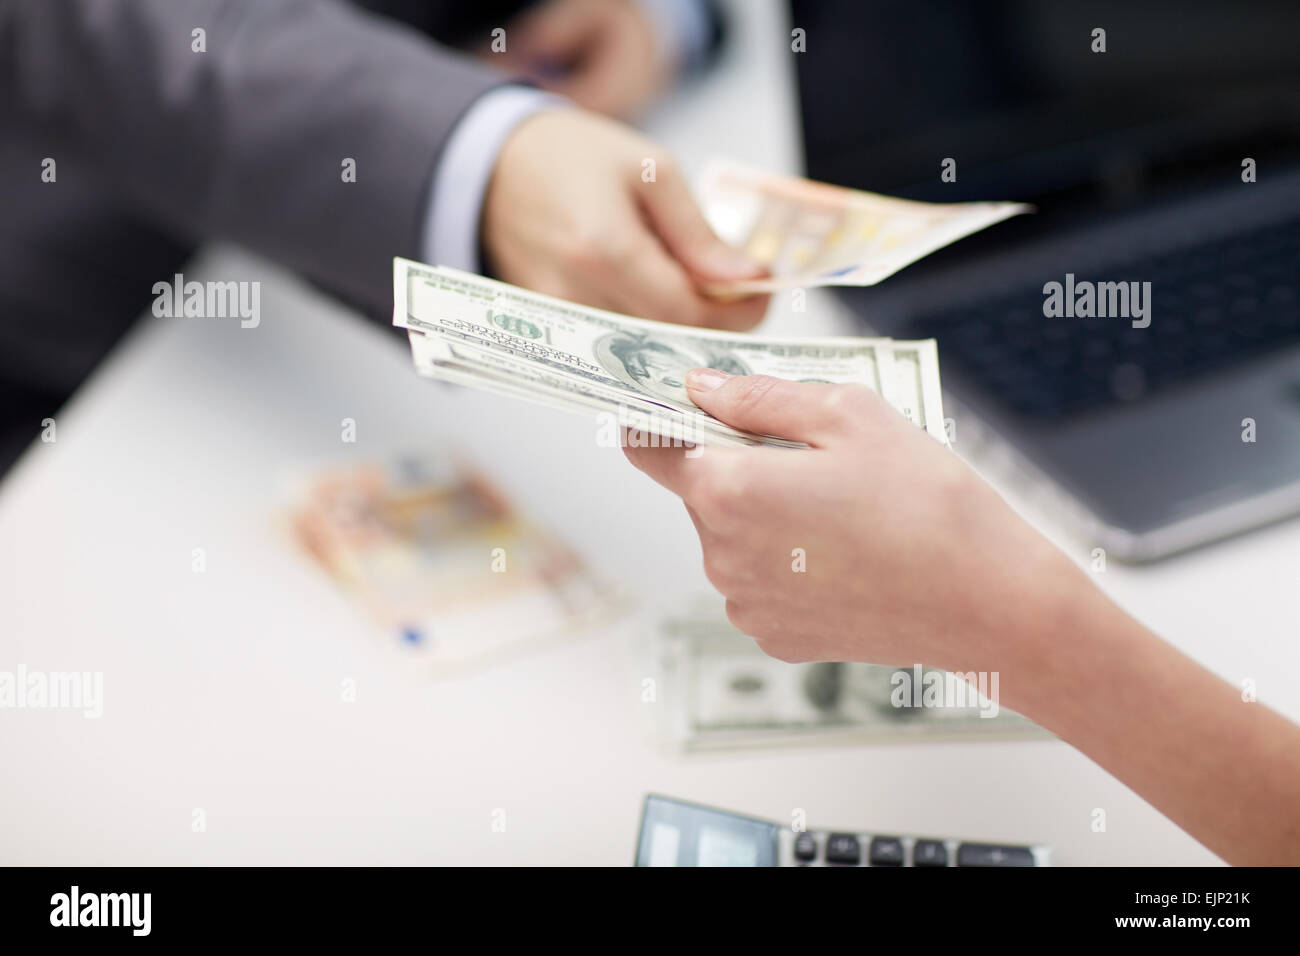 close up of hands giving or exchanging money Stock Photo